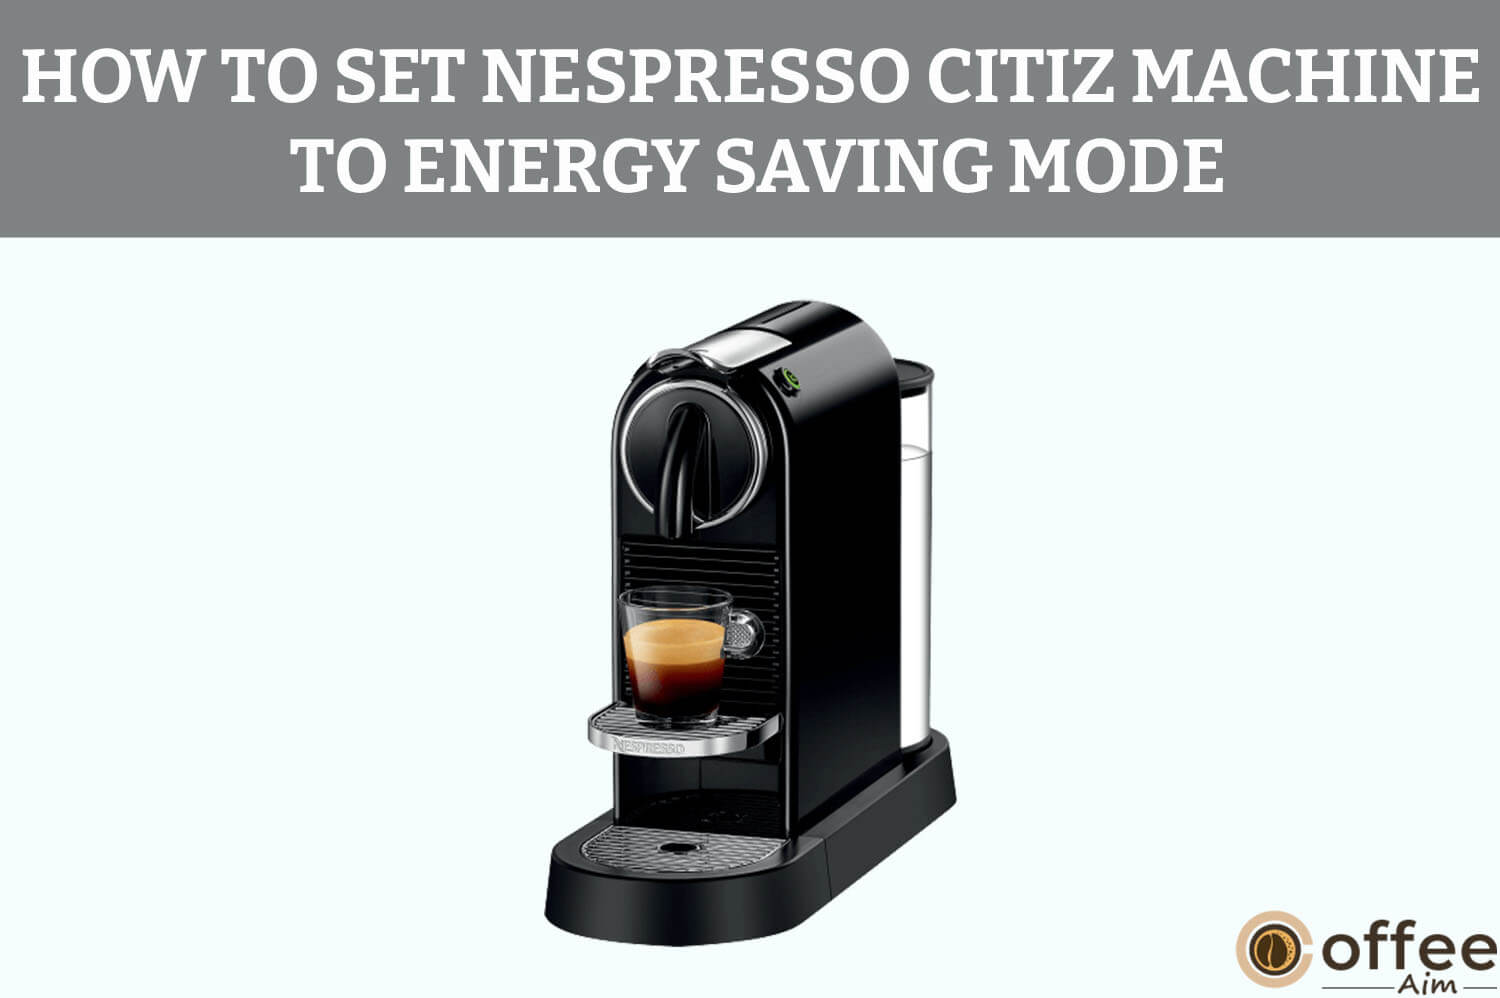 Feature image for the article "How To Set Nespresso Citiz Machine To Energy Saving Mode"